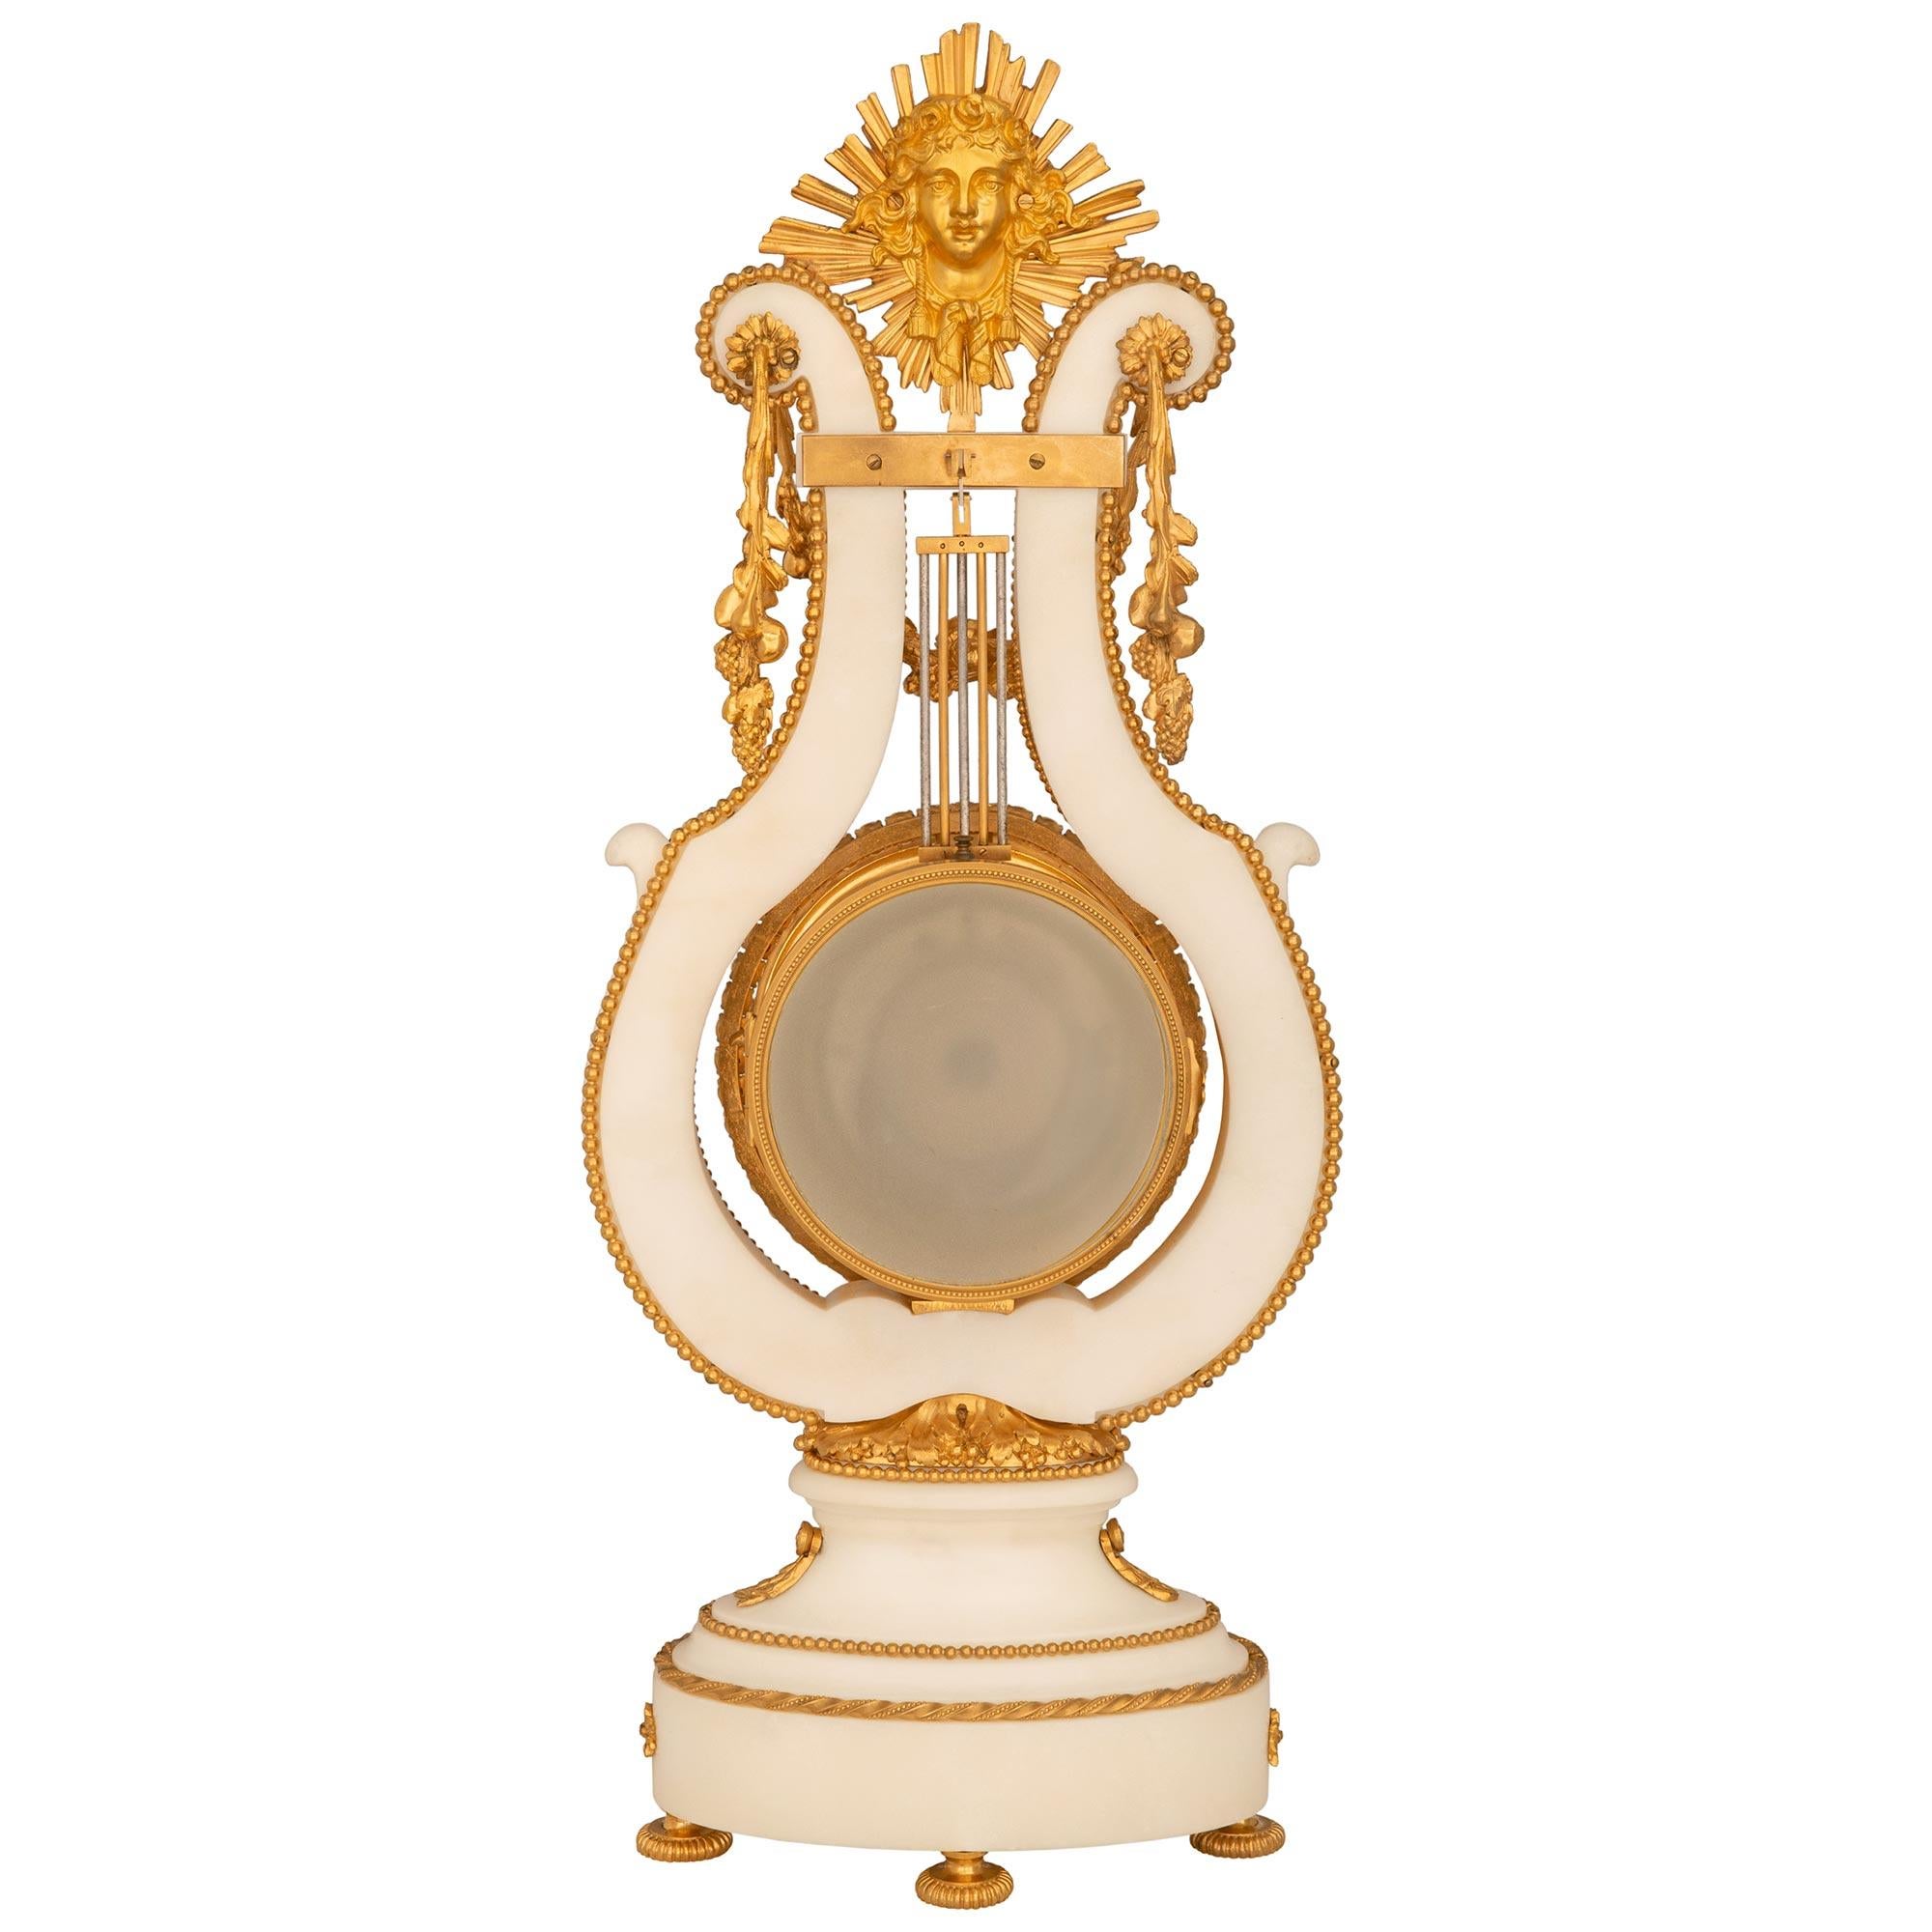 French 19th Century Louis XVI St. White Carrara Marble, Ormolu And Jeweled Clock For Sale 2